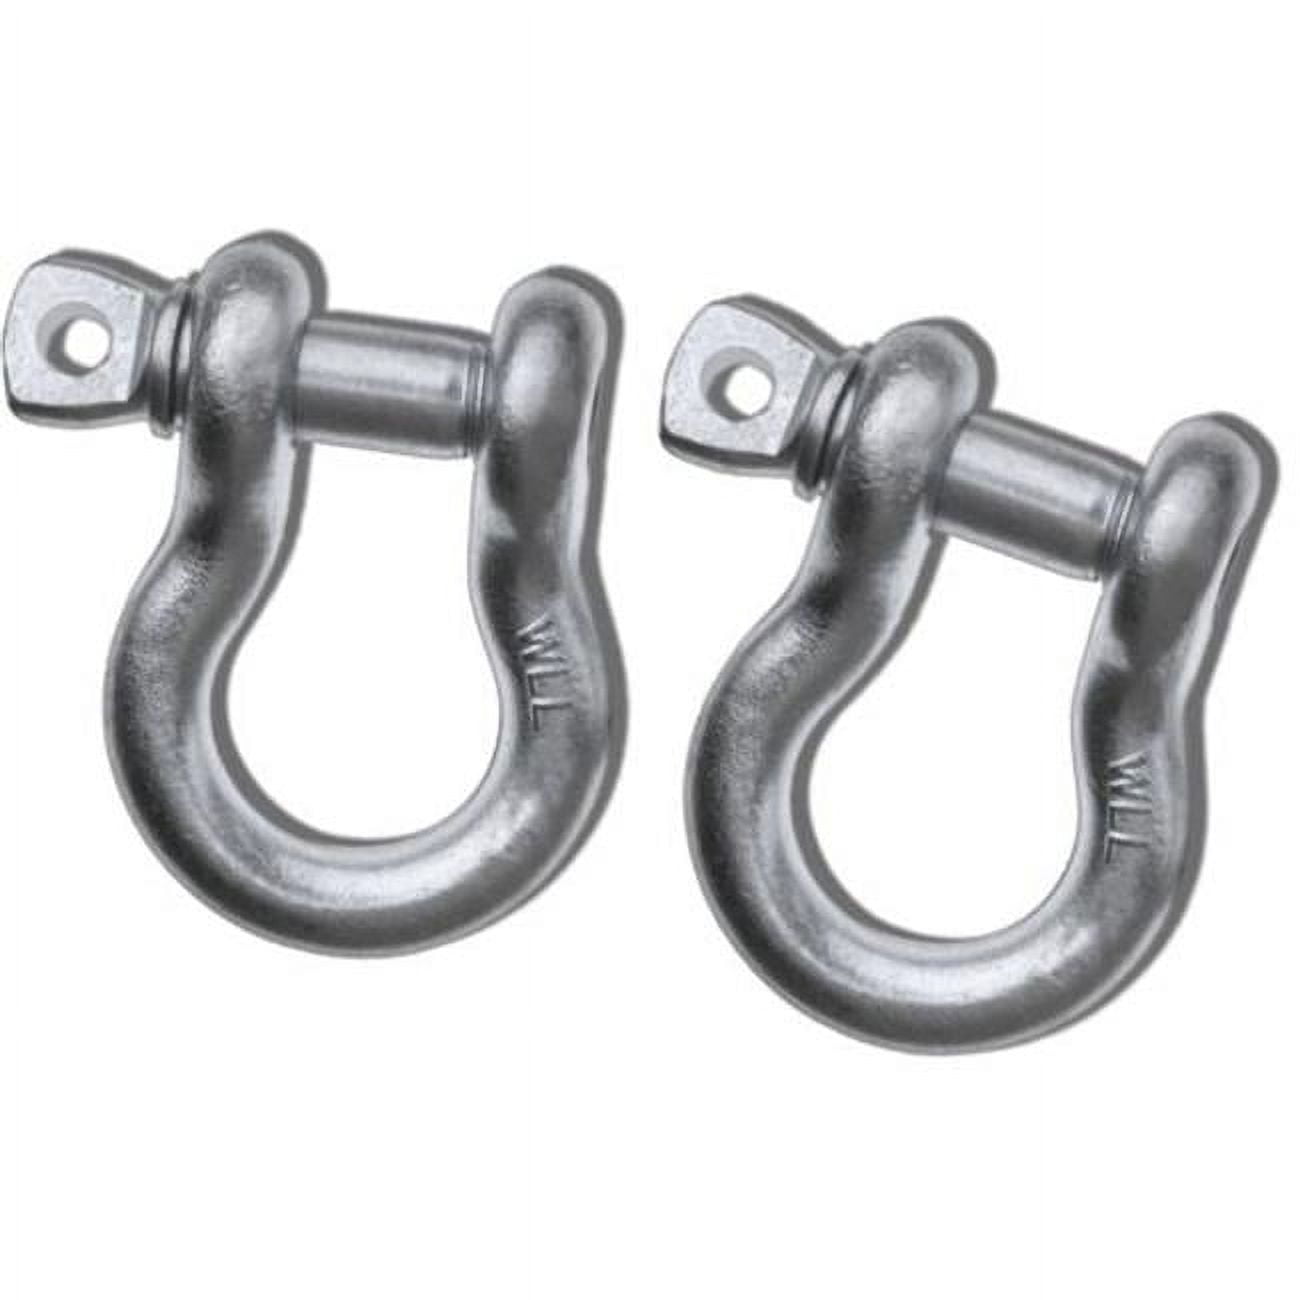 Picture of 1/2 inch ATV D-SHACKLES - GALVANIZED (PAIR) (4X4 VEHICLE RECOVERY)